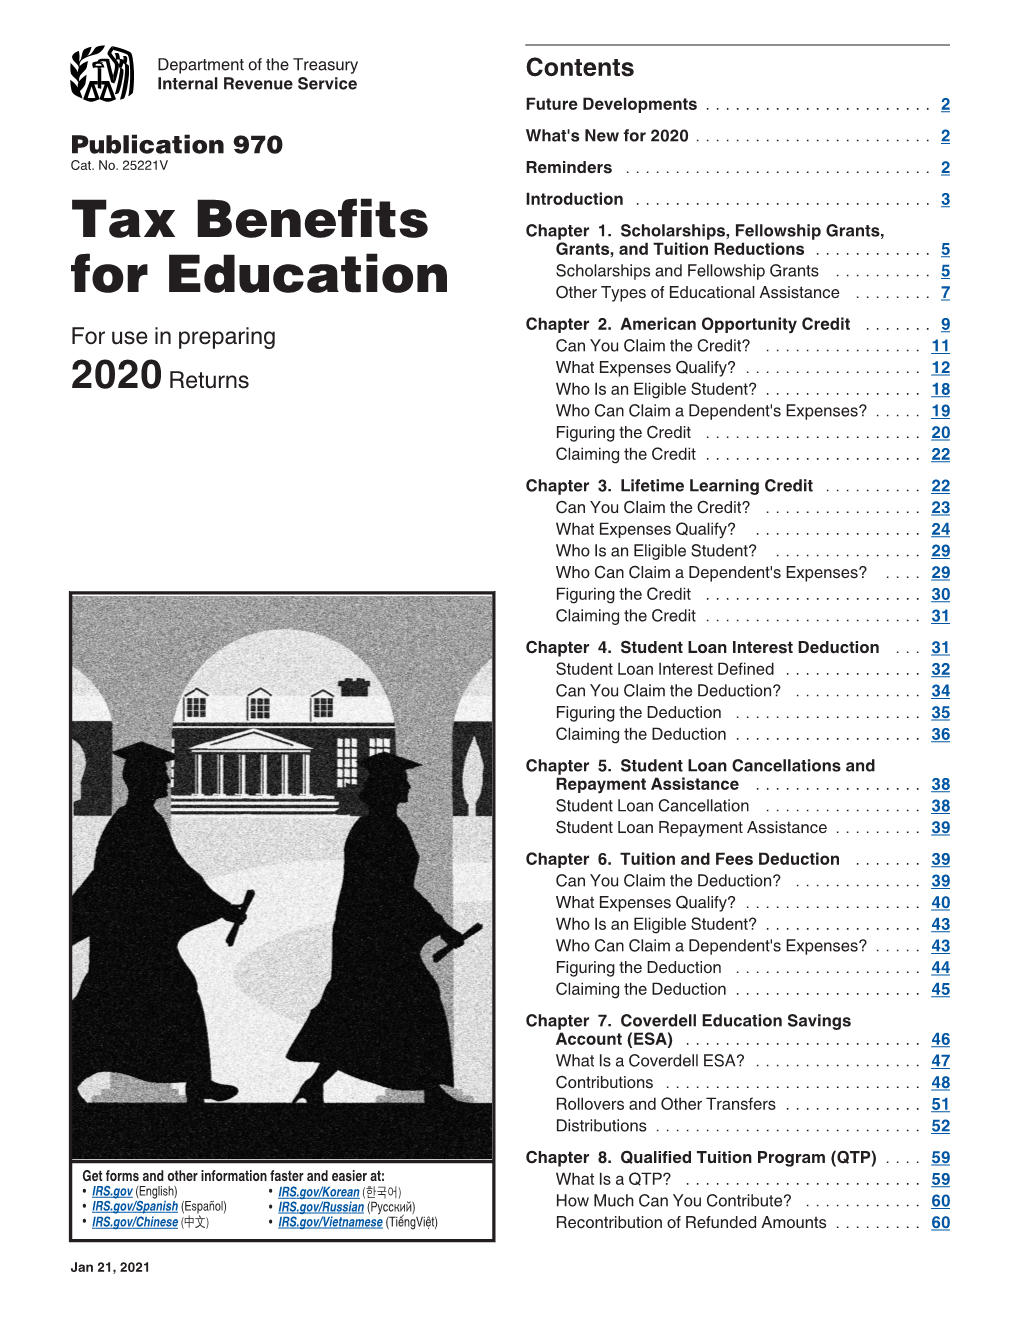 Publication 970, Tax Benefits for Education